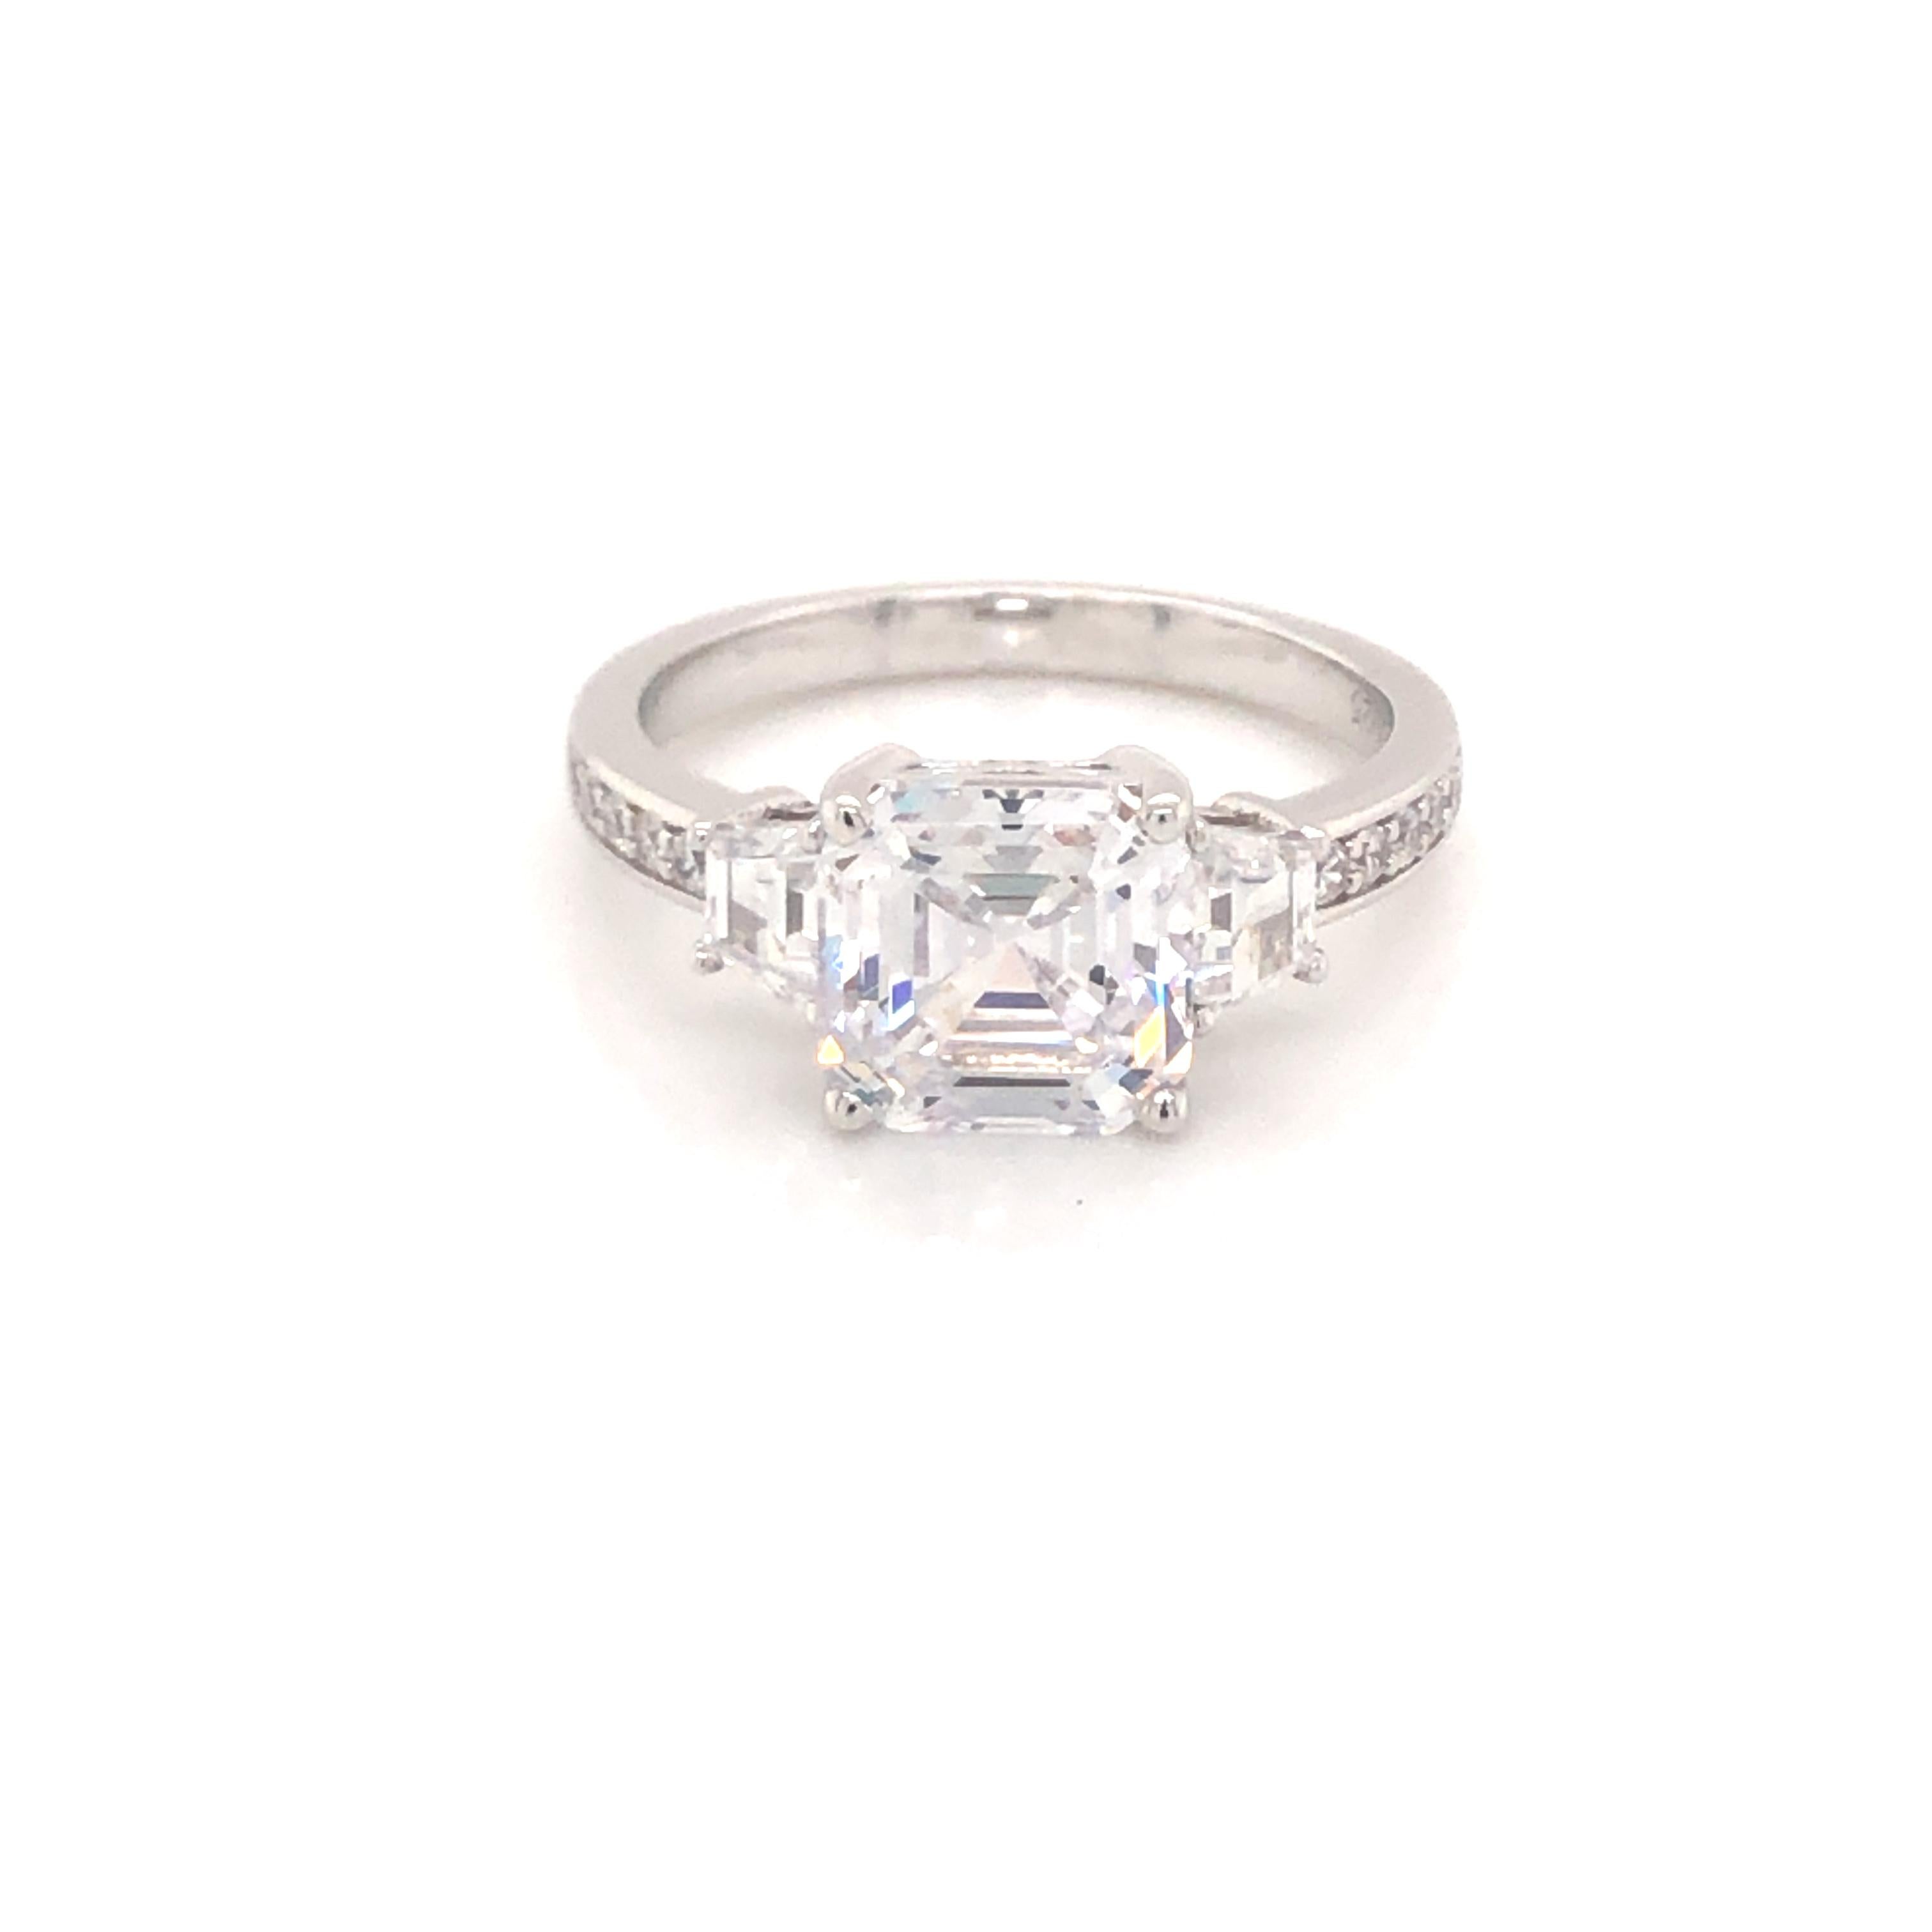 This classic design exudes luxury and natural elegance. 

Featuring a dazzling 3.50ct centre asscher cut cubic zirconia flanked by two tapered princess cuts with five round brilliant cuts on either side. 

Composed of 925 sterling silver with a high